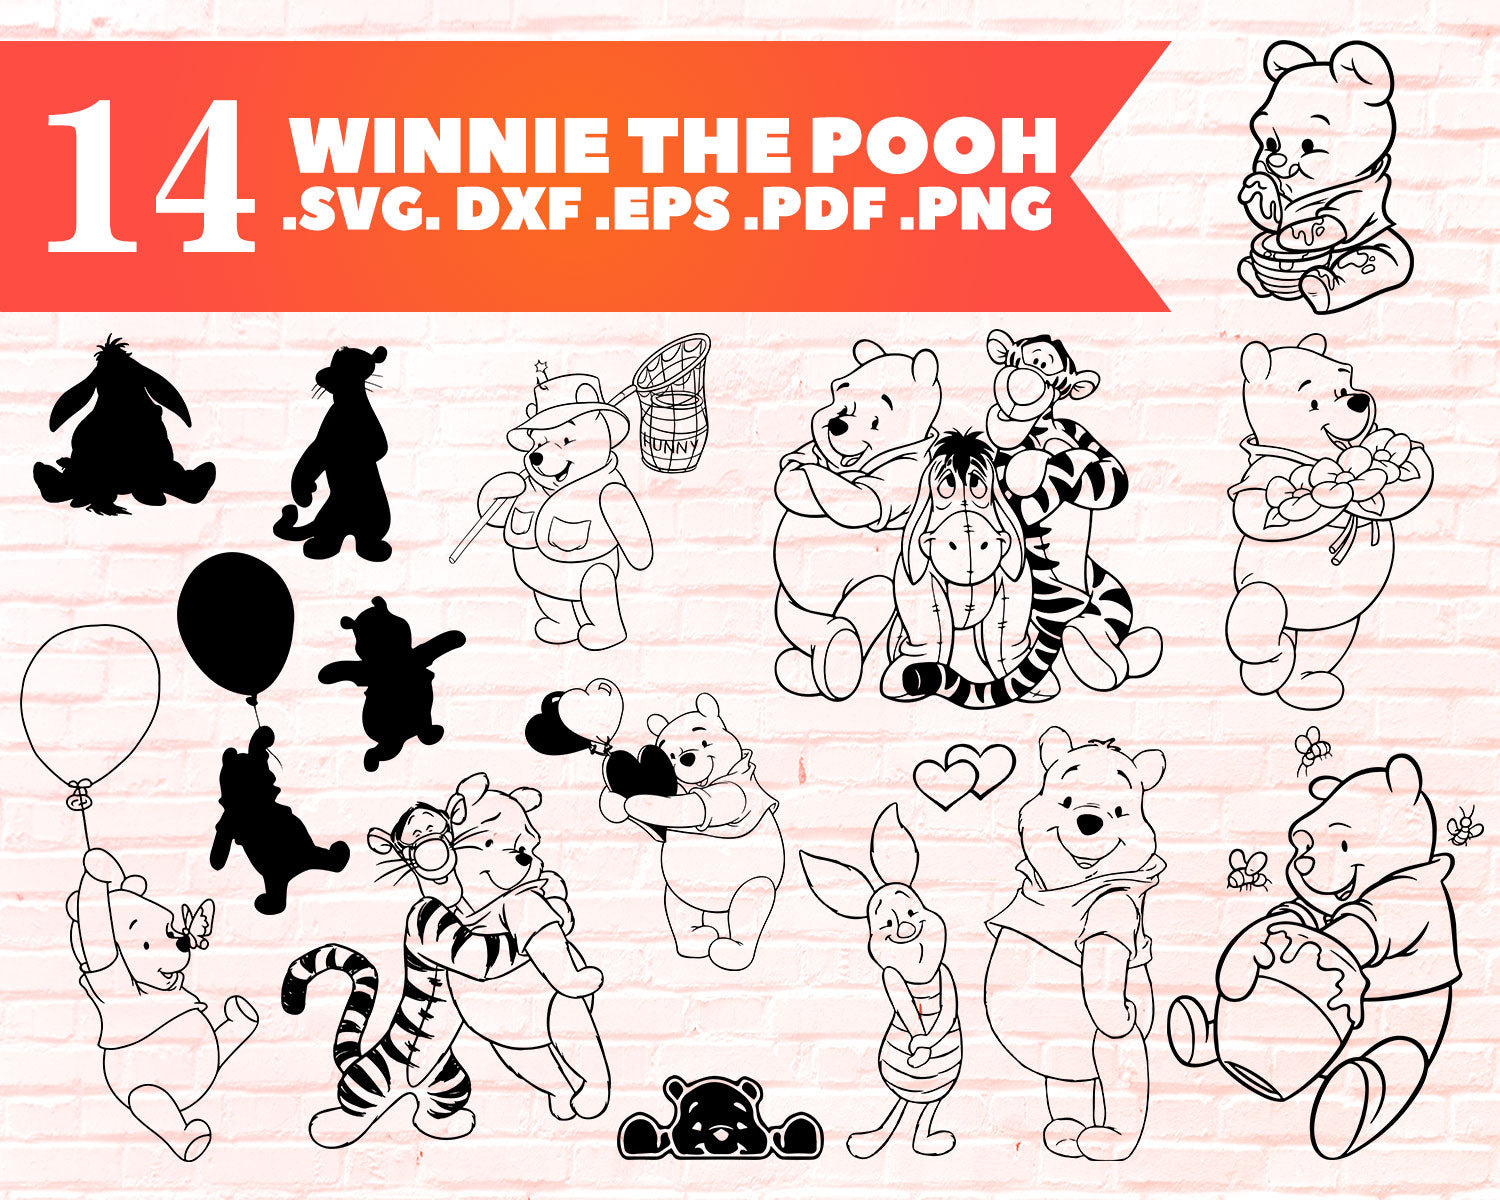 Winnie The Pooh Svg Bundle Winnie Pooh Cut Files Dxf Eps Png Win Clipartic